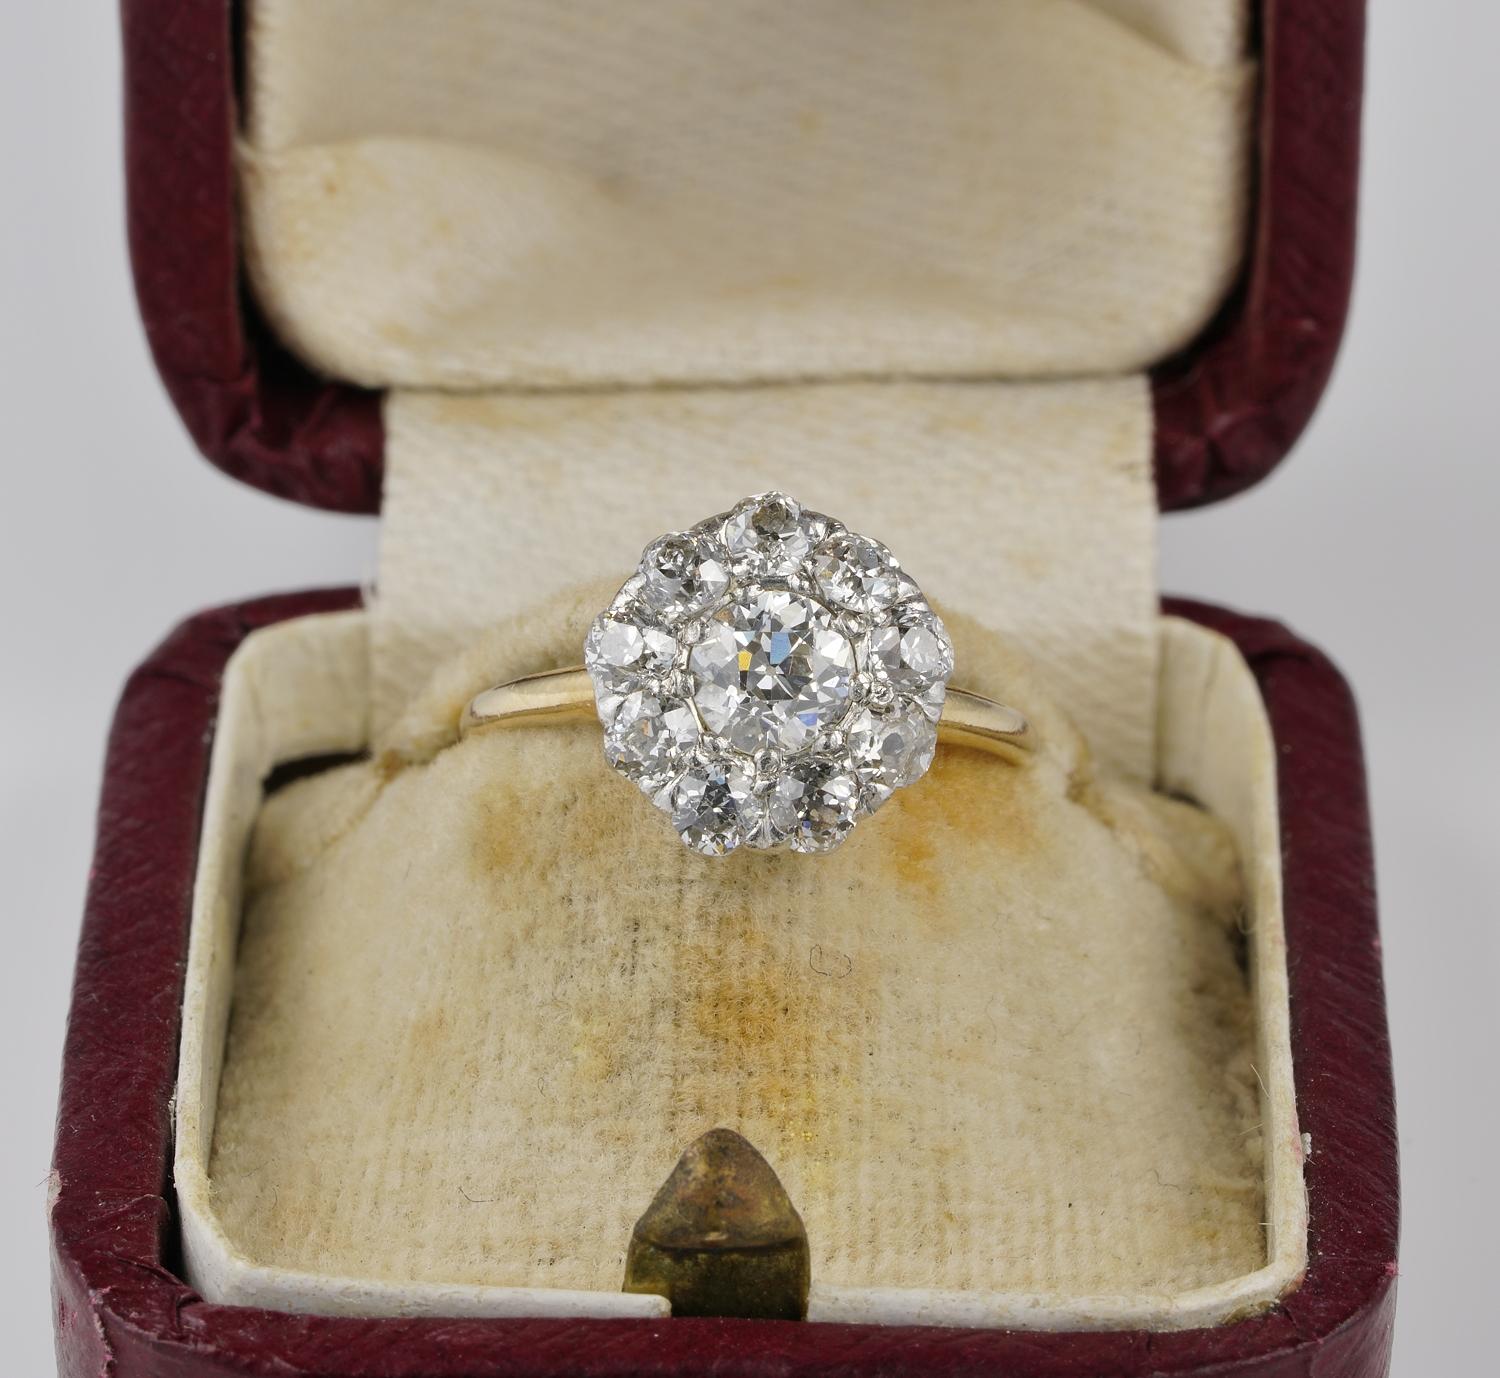 Edwardian Delight!

This authentic Edwardian period Diamond cluster ring has been hand crafted during 1900 period of solid 18 KT gold with solid Platinum crown
Dainty Daisy shape made by a larger Diamond in the middle with 9 surrounding Diamonds